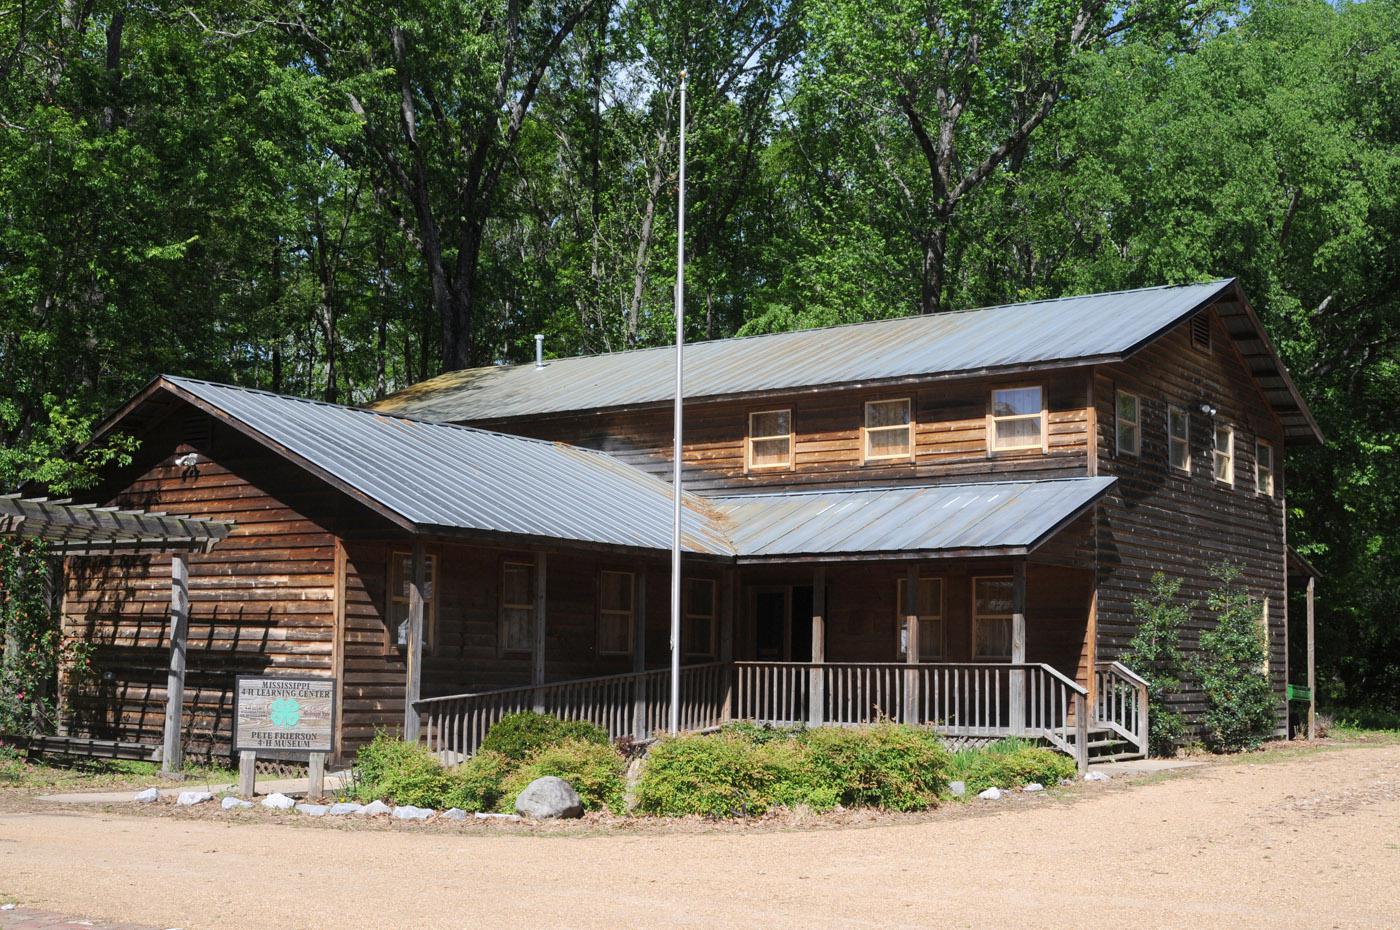 The 4-H Learning Center and Pete Frierson Museum is located at the Mississippi Agriculture and Forestry Museum on Lakeland Drive in Jackson.  (Photo by Kat Lawrence)